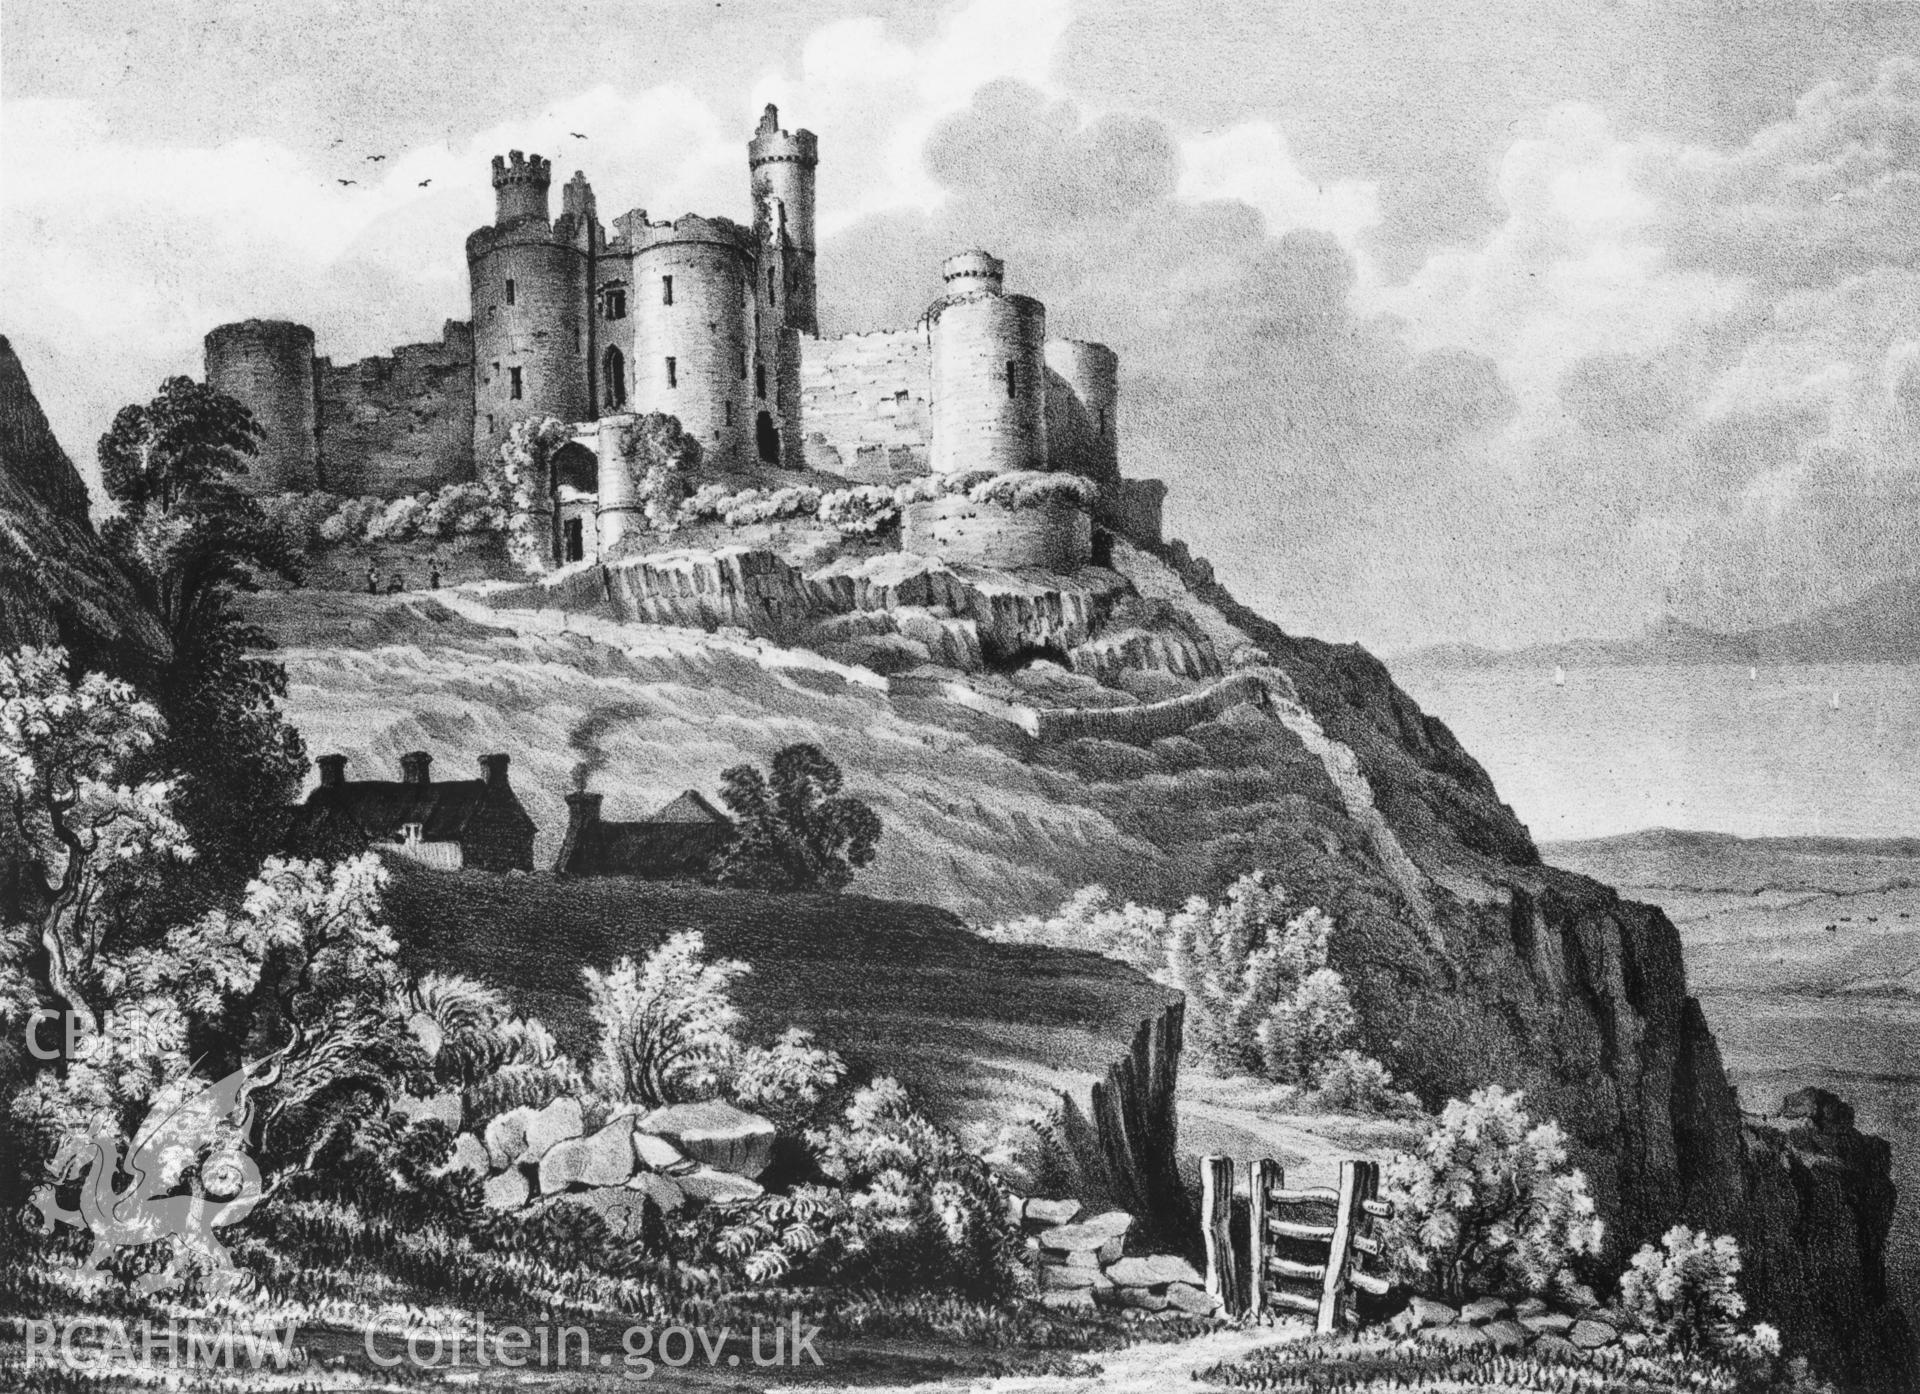 Digital copy of a black and white illustration showing to Harlech Castle: general view from east, dated to the 18th century.